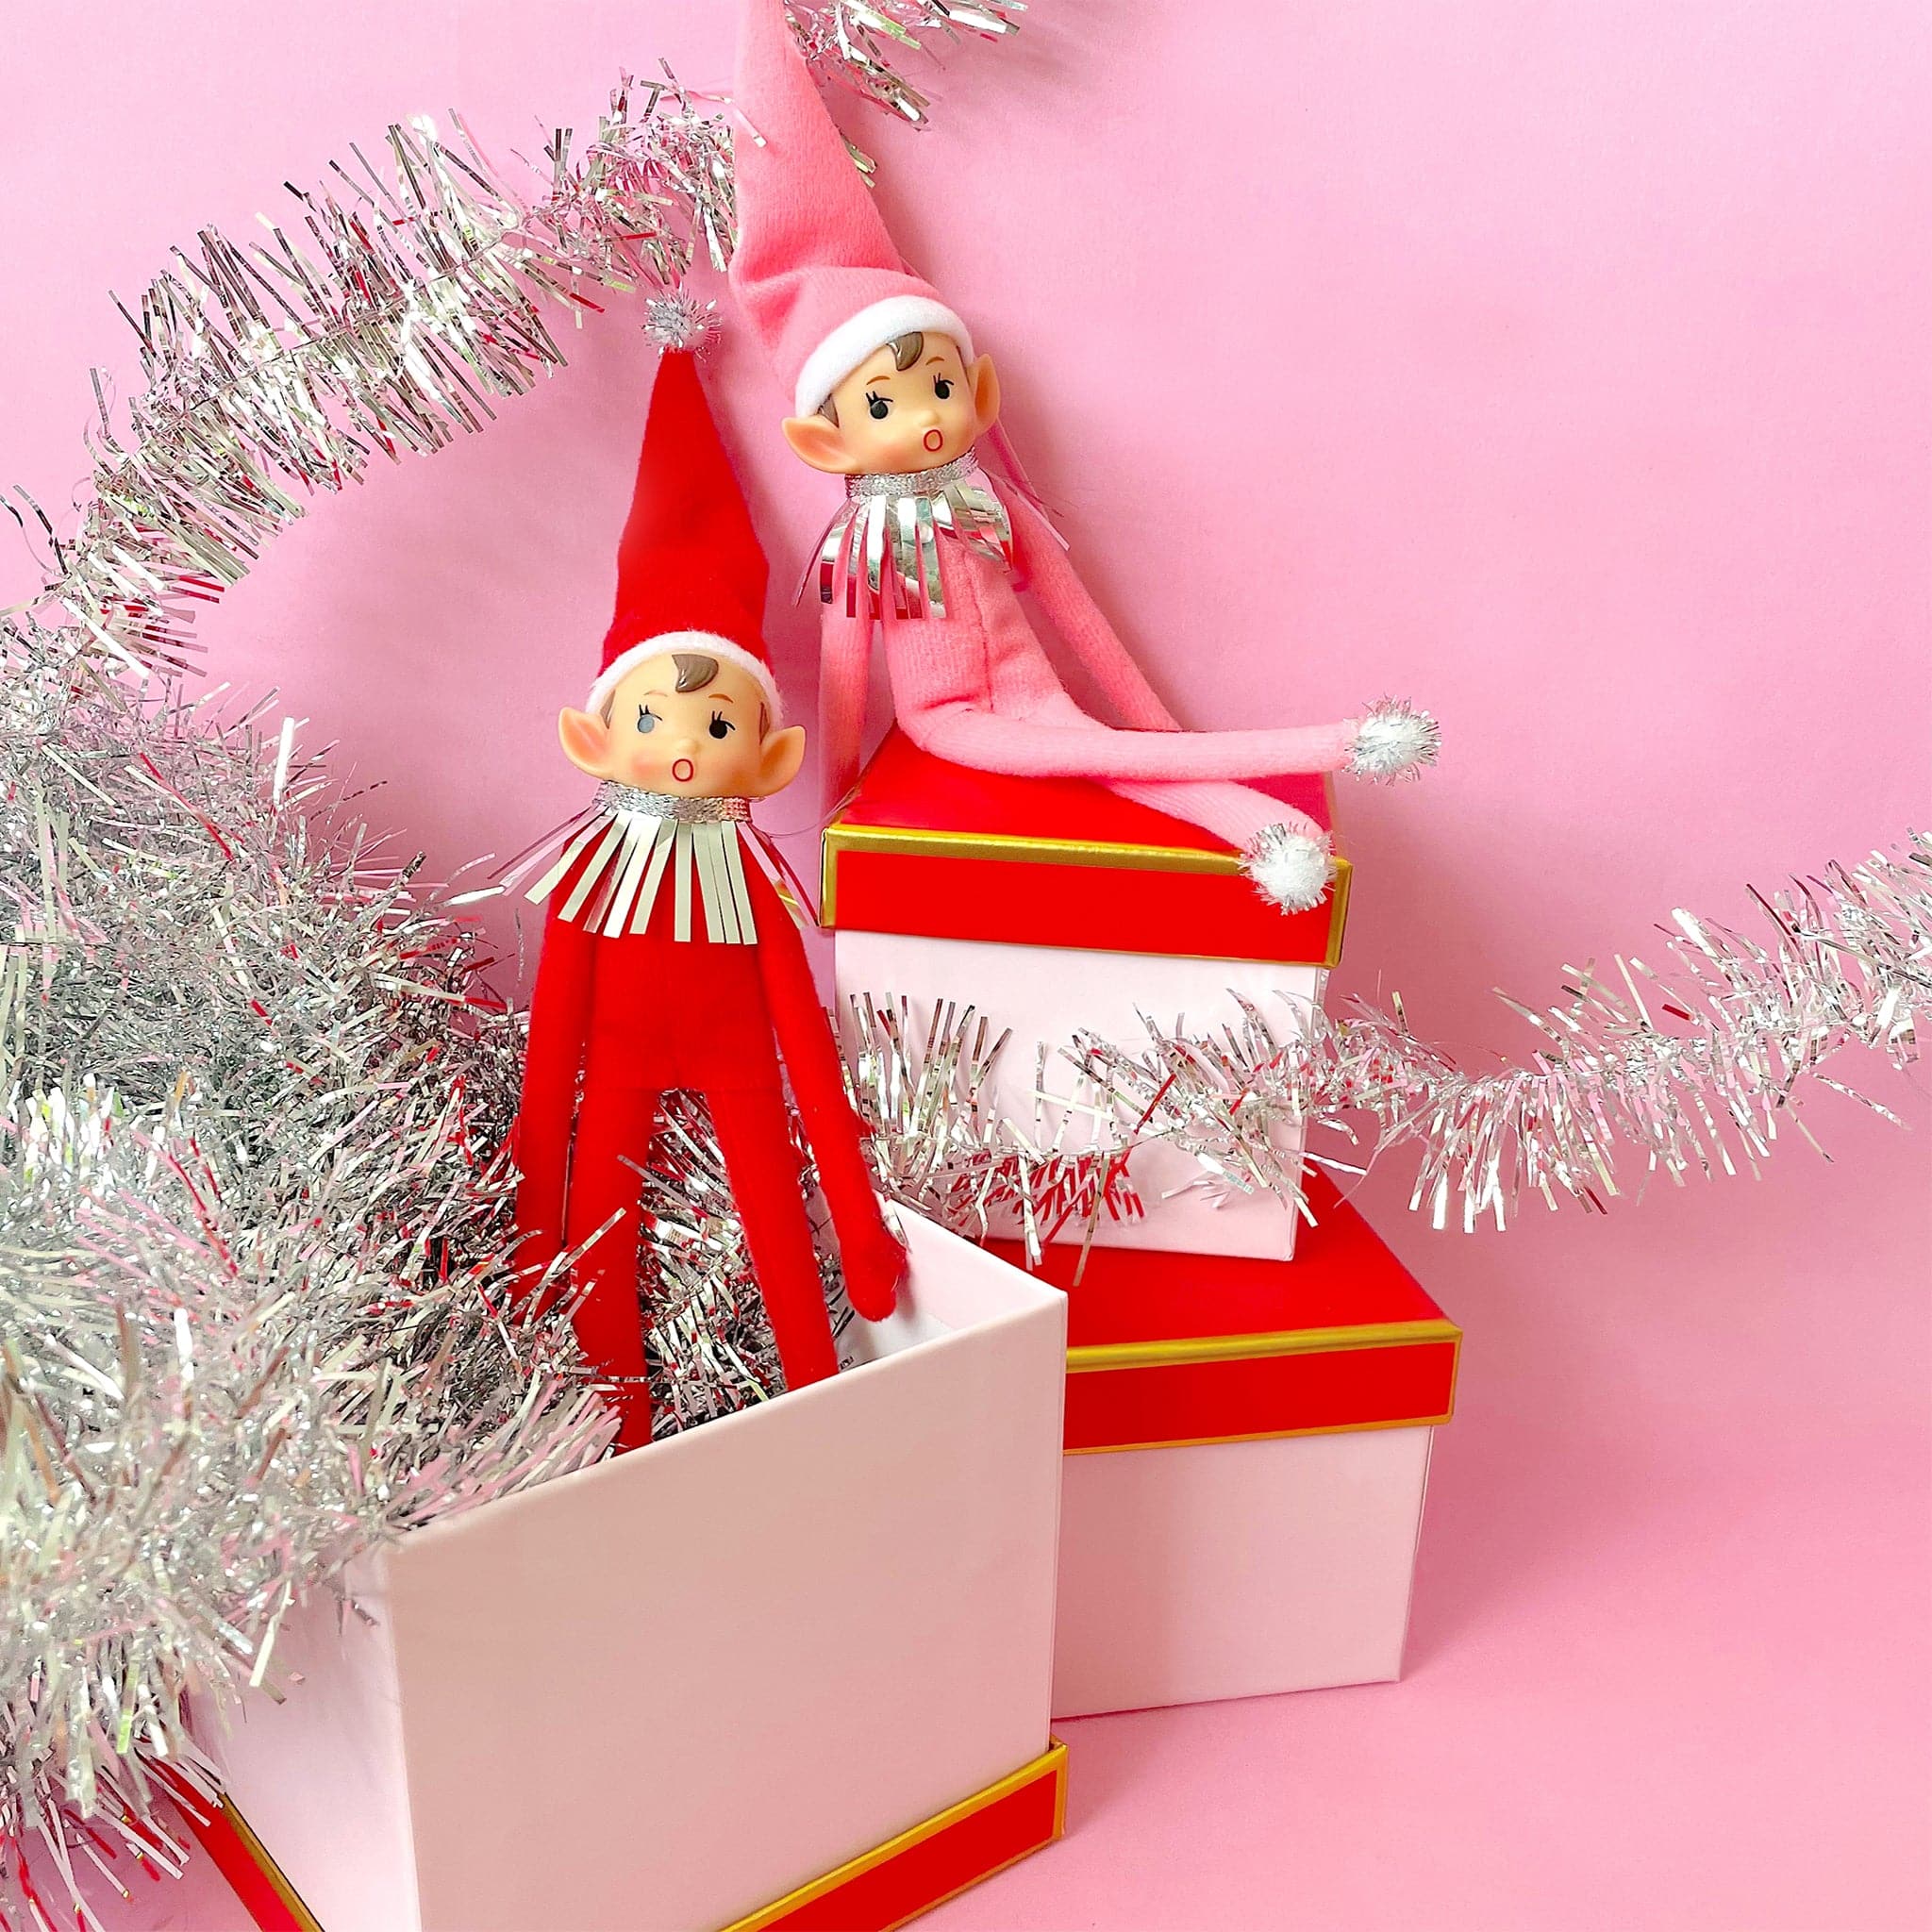 An elf ornament with long arms and legs with a pink suit and hat on as well as a pink string loop for hanging and photographed here next to the red version.